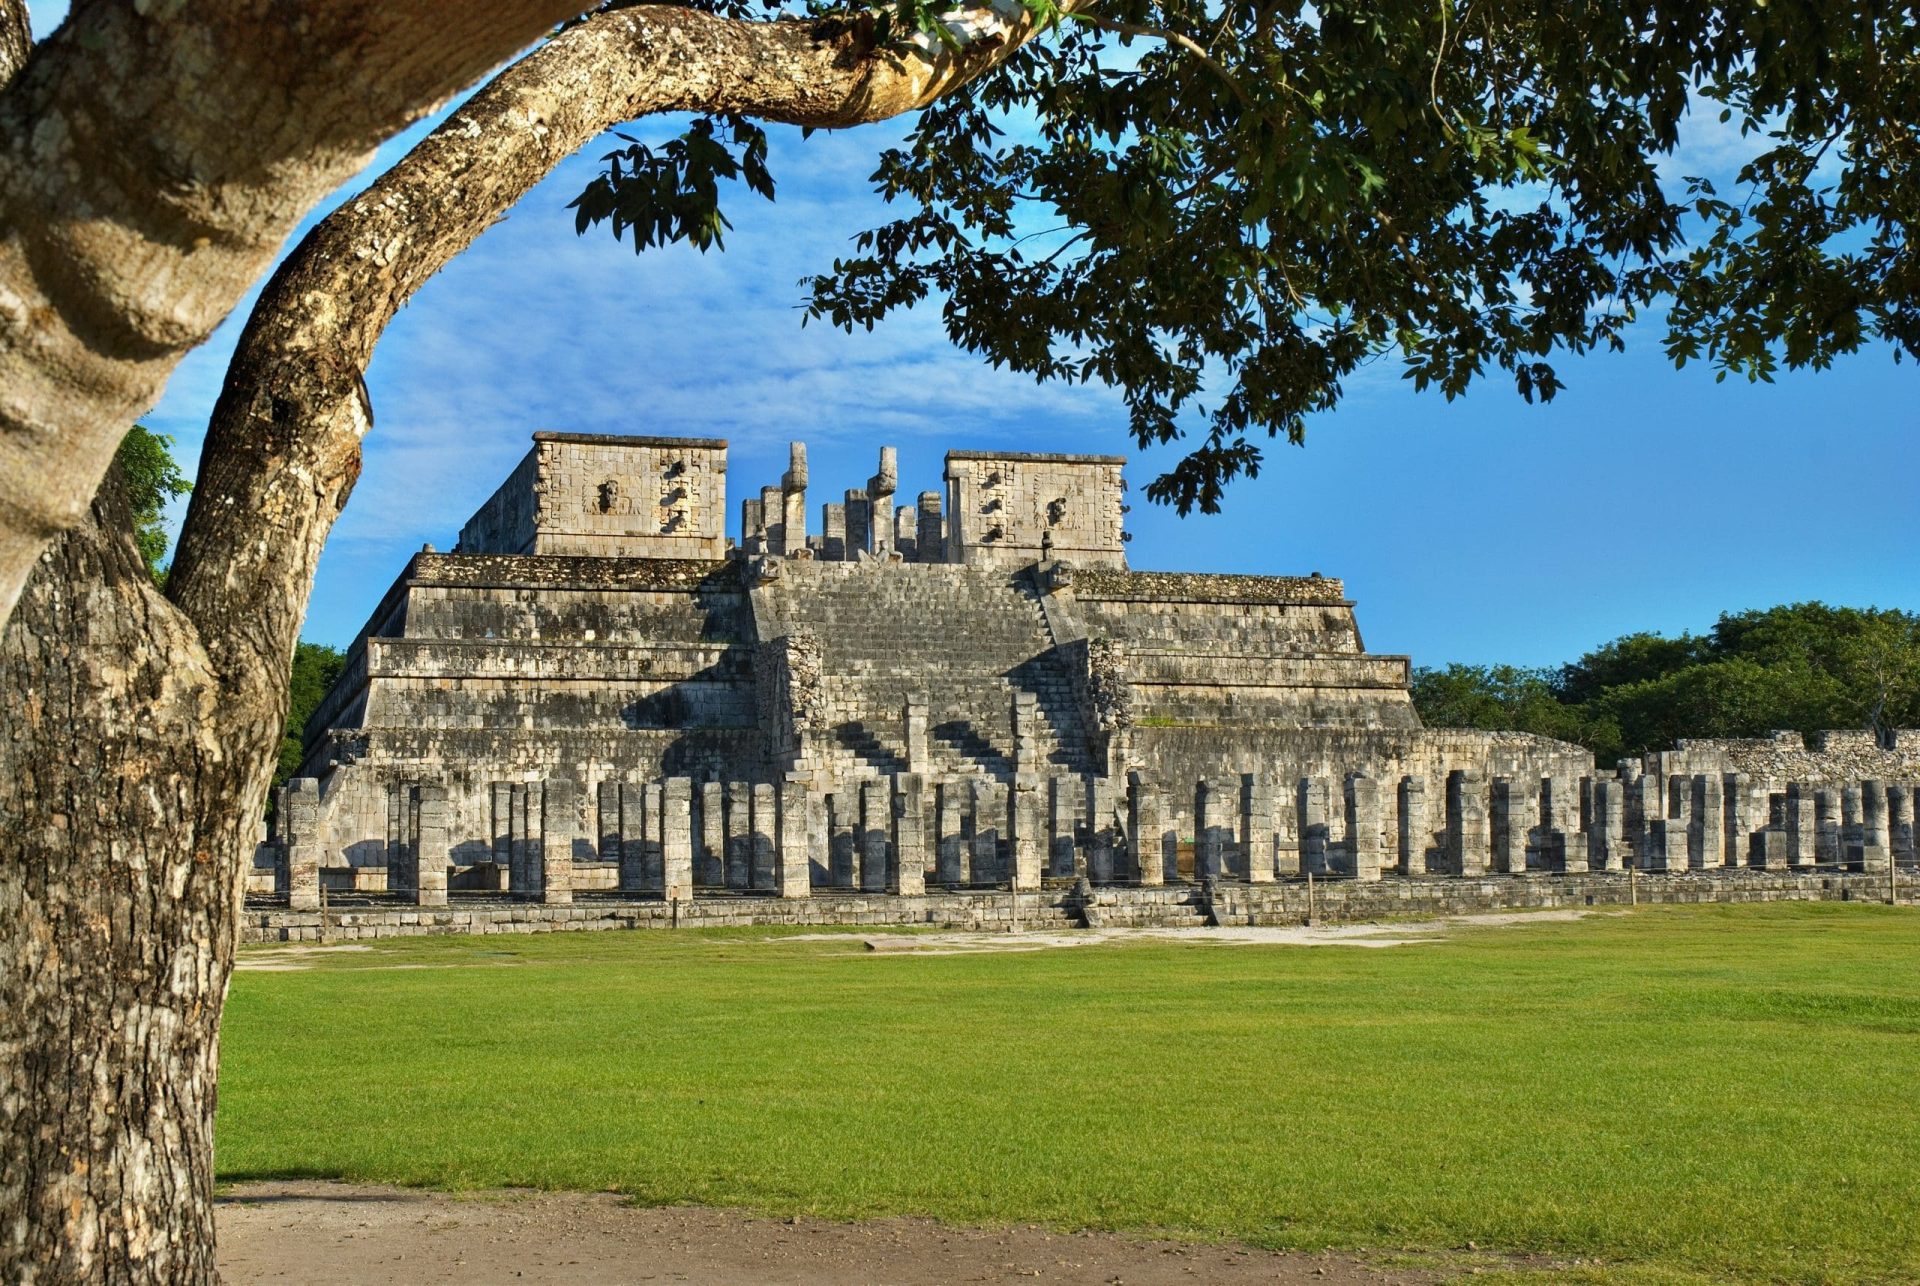 How long is the Chichen Itza tour?